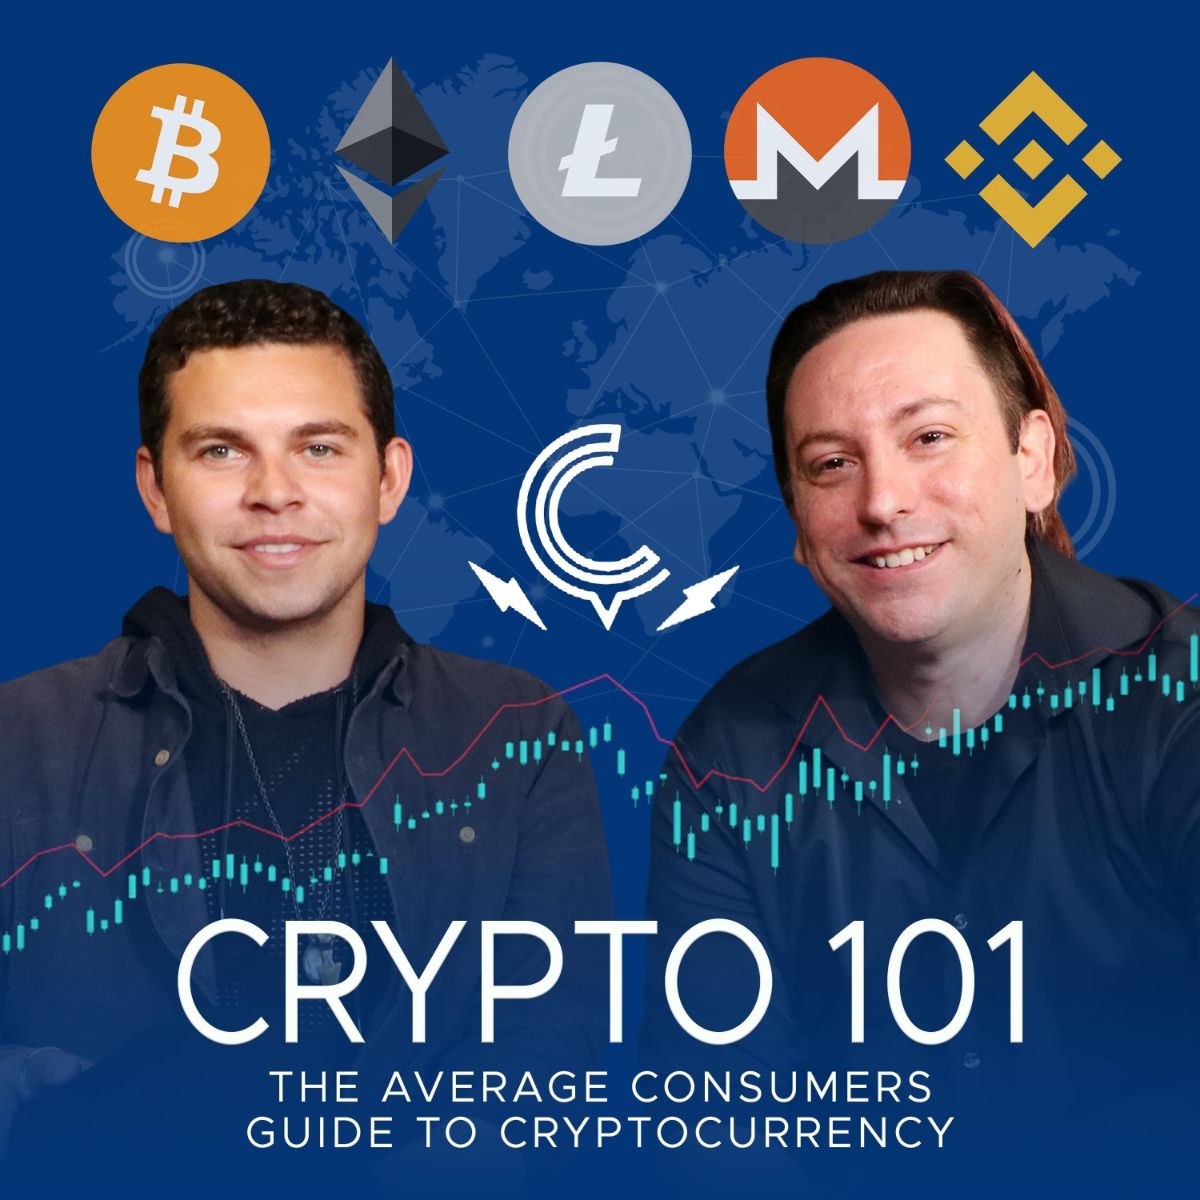 Ep. 299 - "Why I Left Amazon to Go All-in on Crypto", w/ Bittrex CEO Bill Shihara